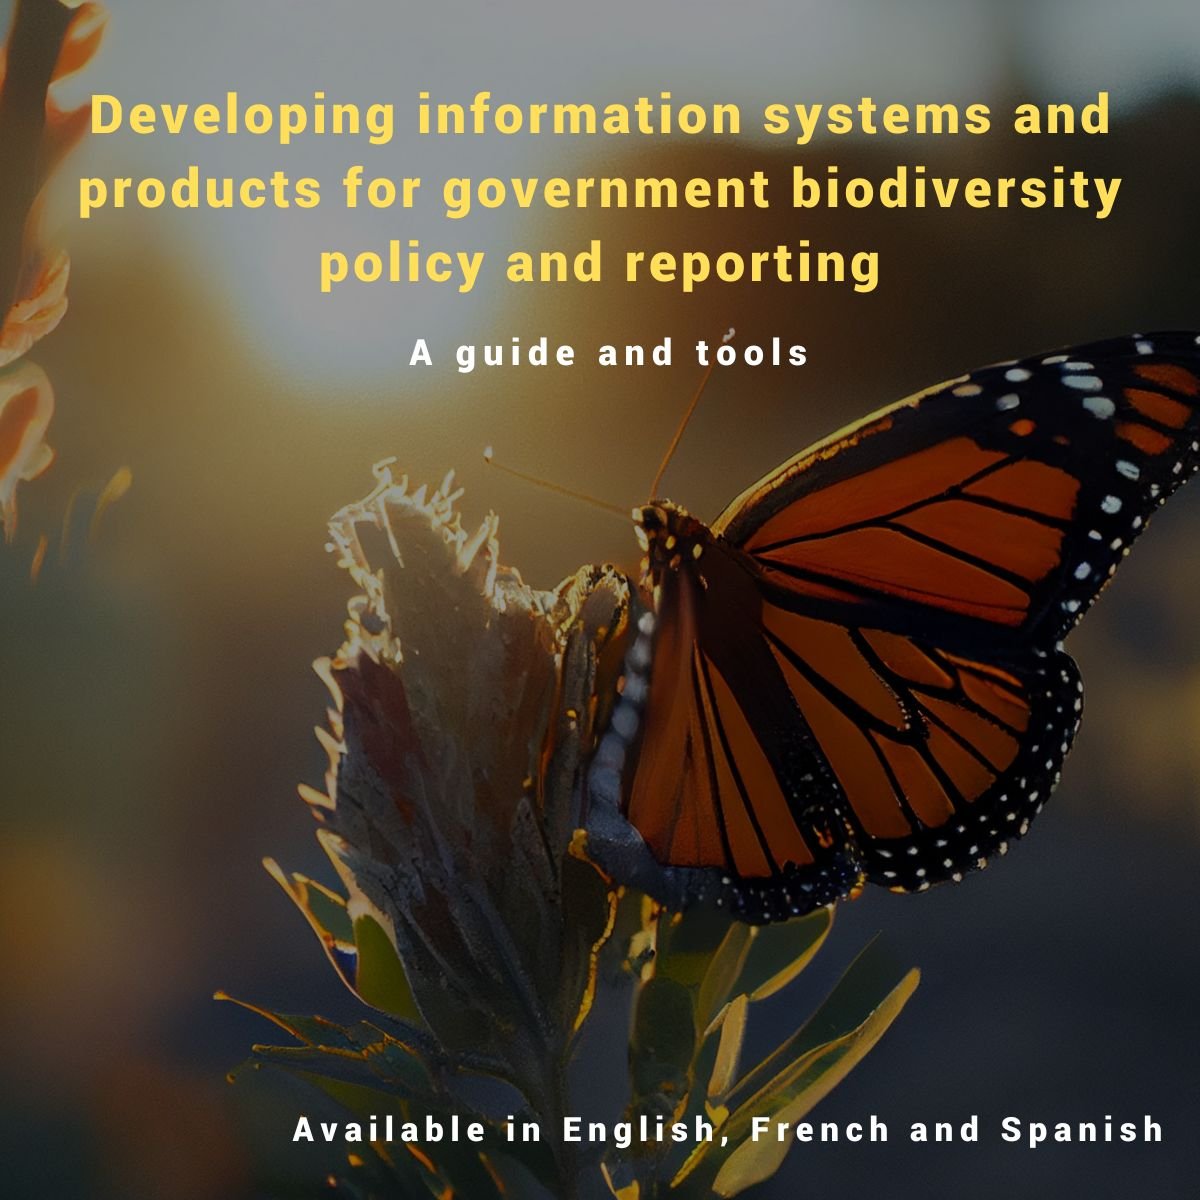 🎉UNEP-WCMC is pleased to share an information systems guide and tools to help governments have the indicators and analyses needed for biodiversity-related policy making and reporting: ➡️eu1.hubs.ly/H08ymBt0 ➡️eu1.hubs.ly/H08ymCp0 @unepwcmc